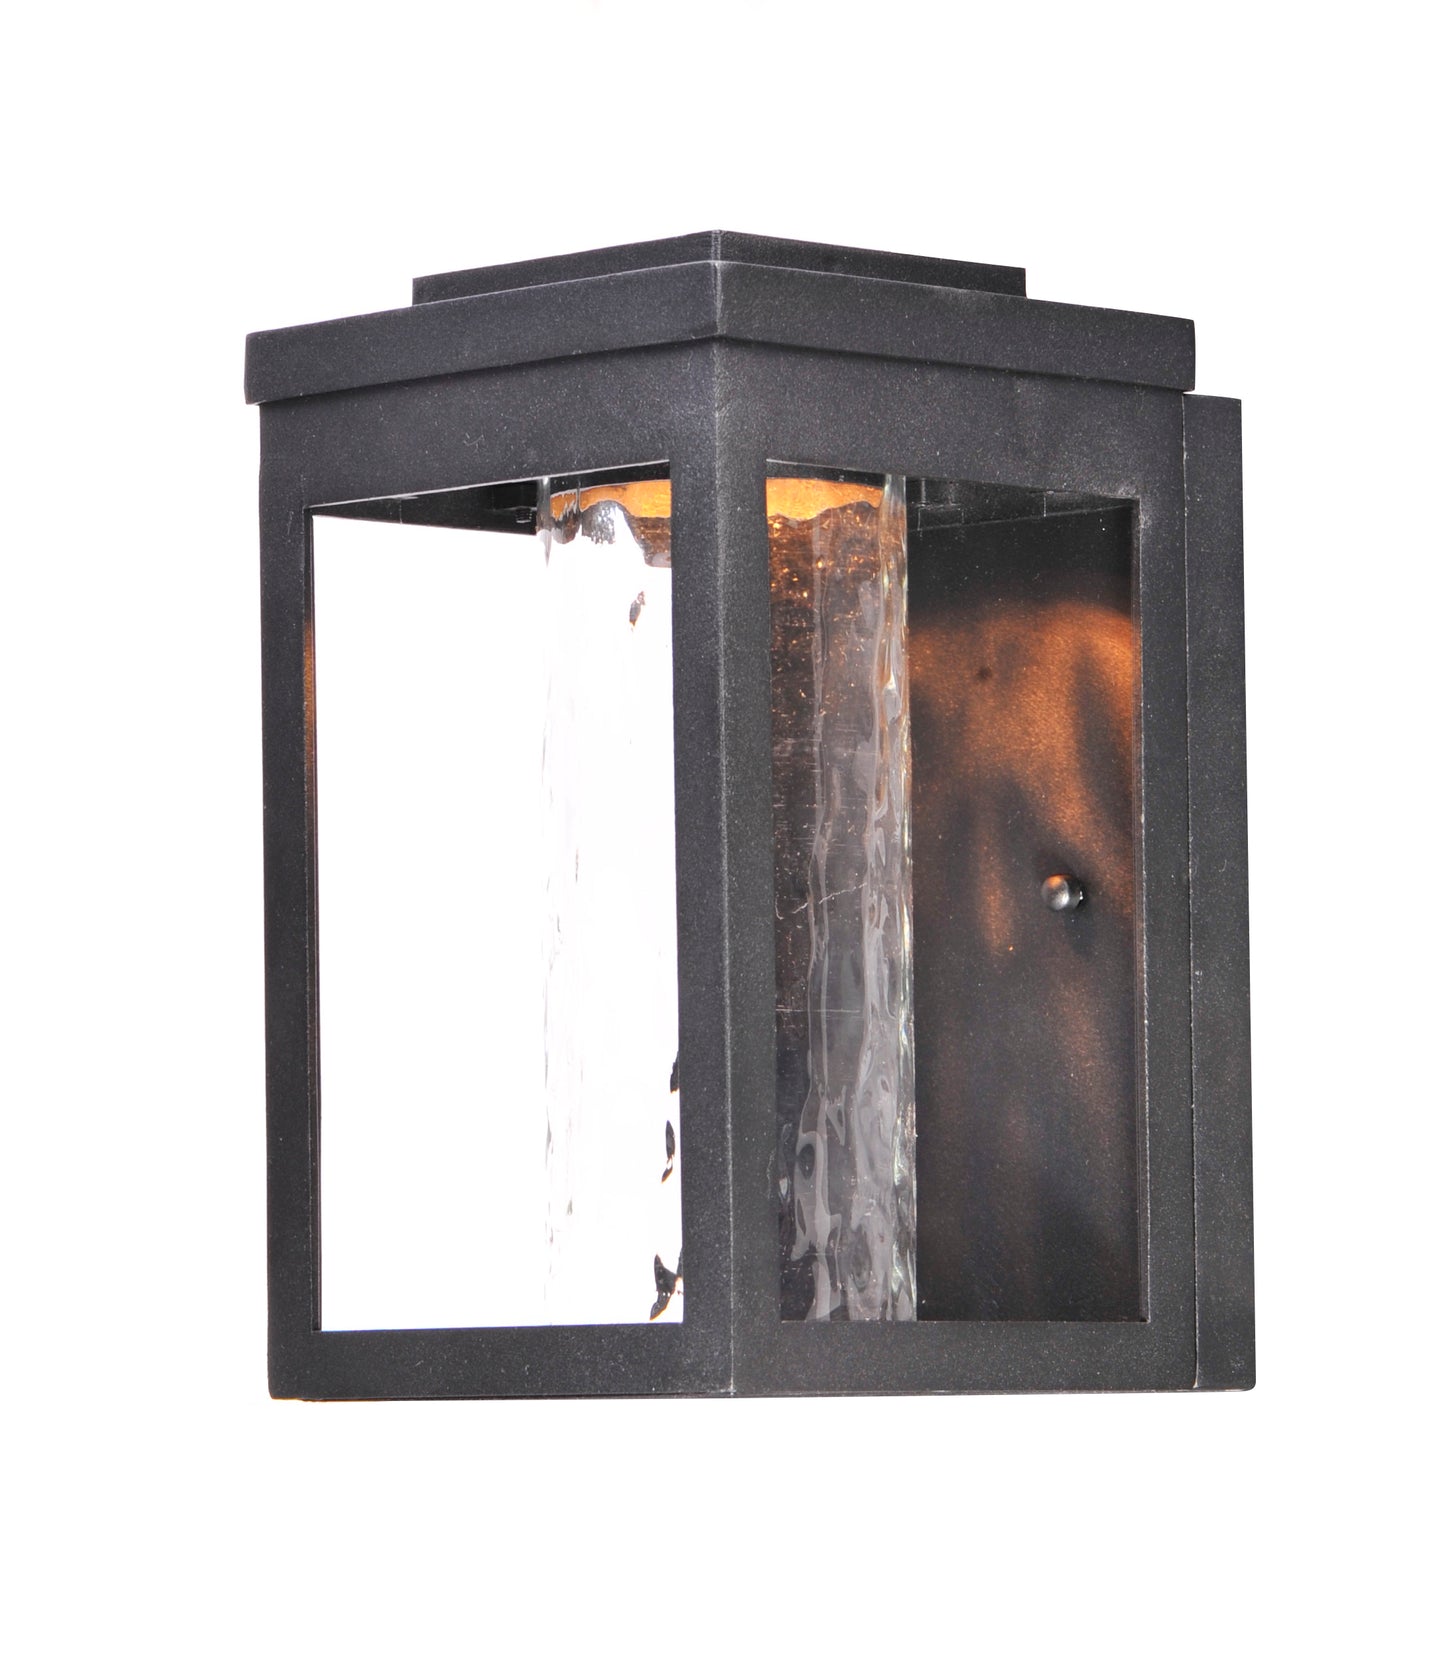 55902WGBK - Salon LED 10" Outdoor Wall Sconce - Black